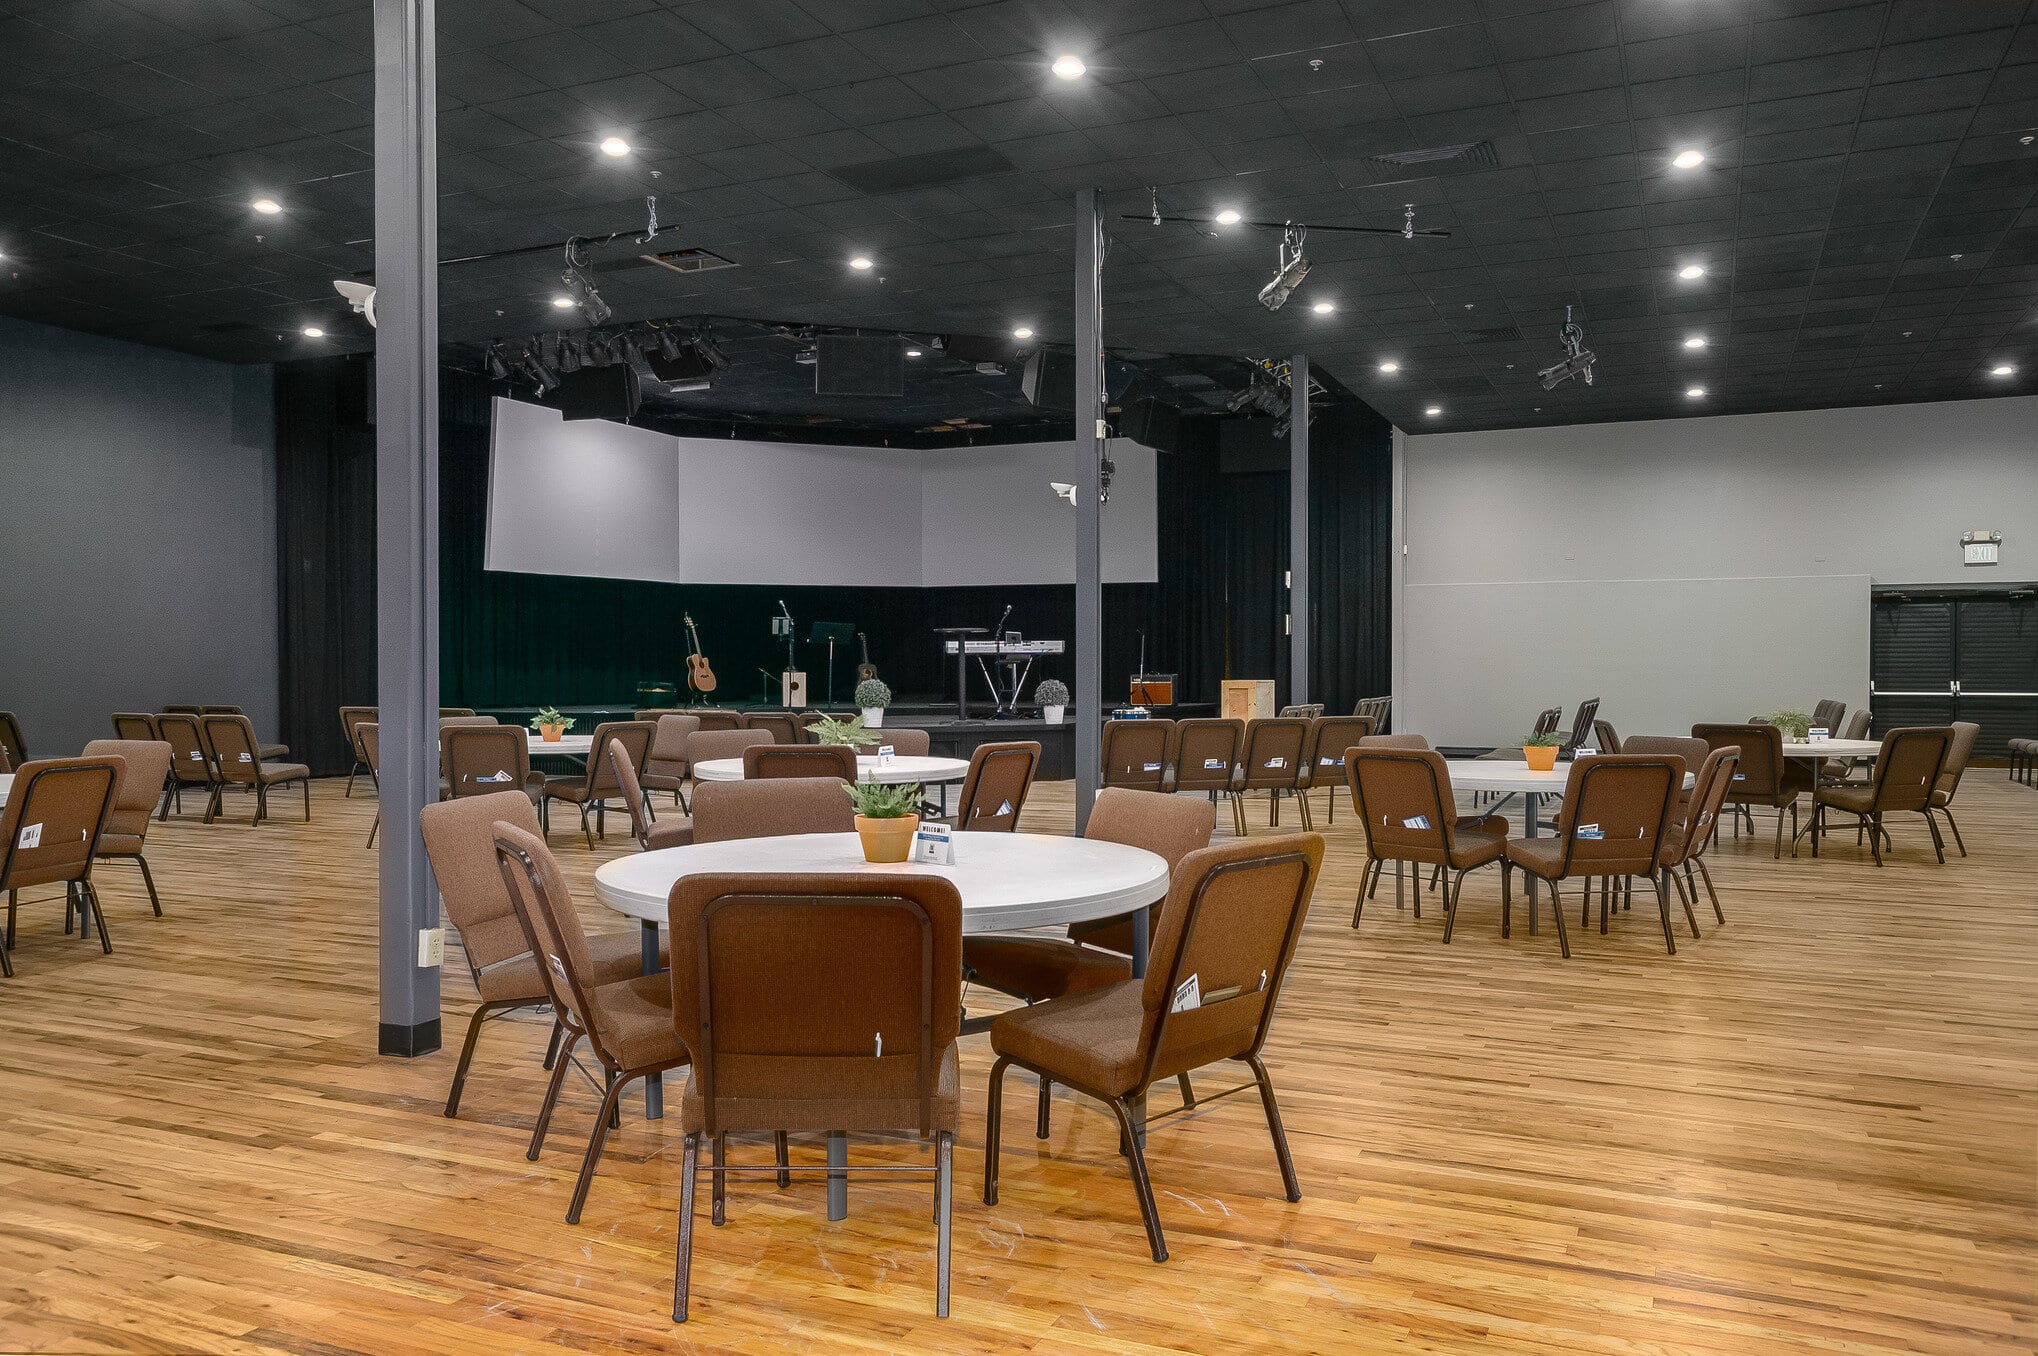 Large banquet hall with stage and round tables